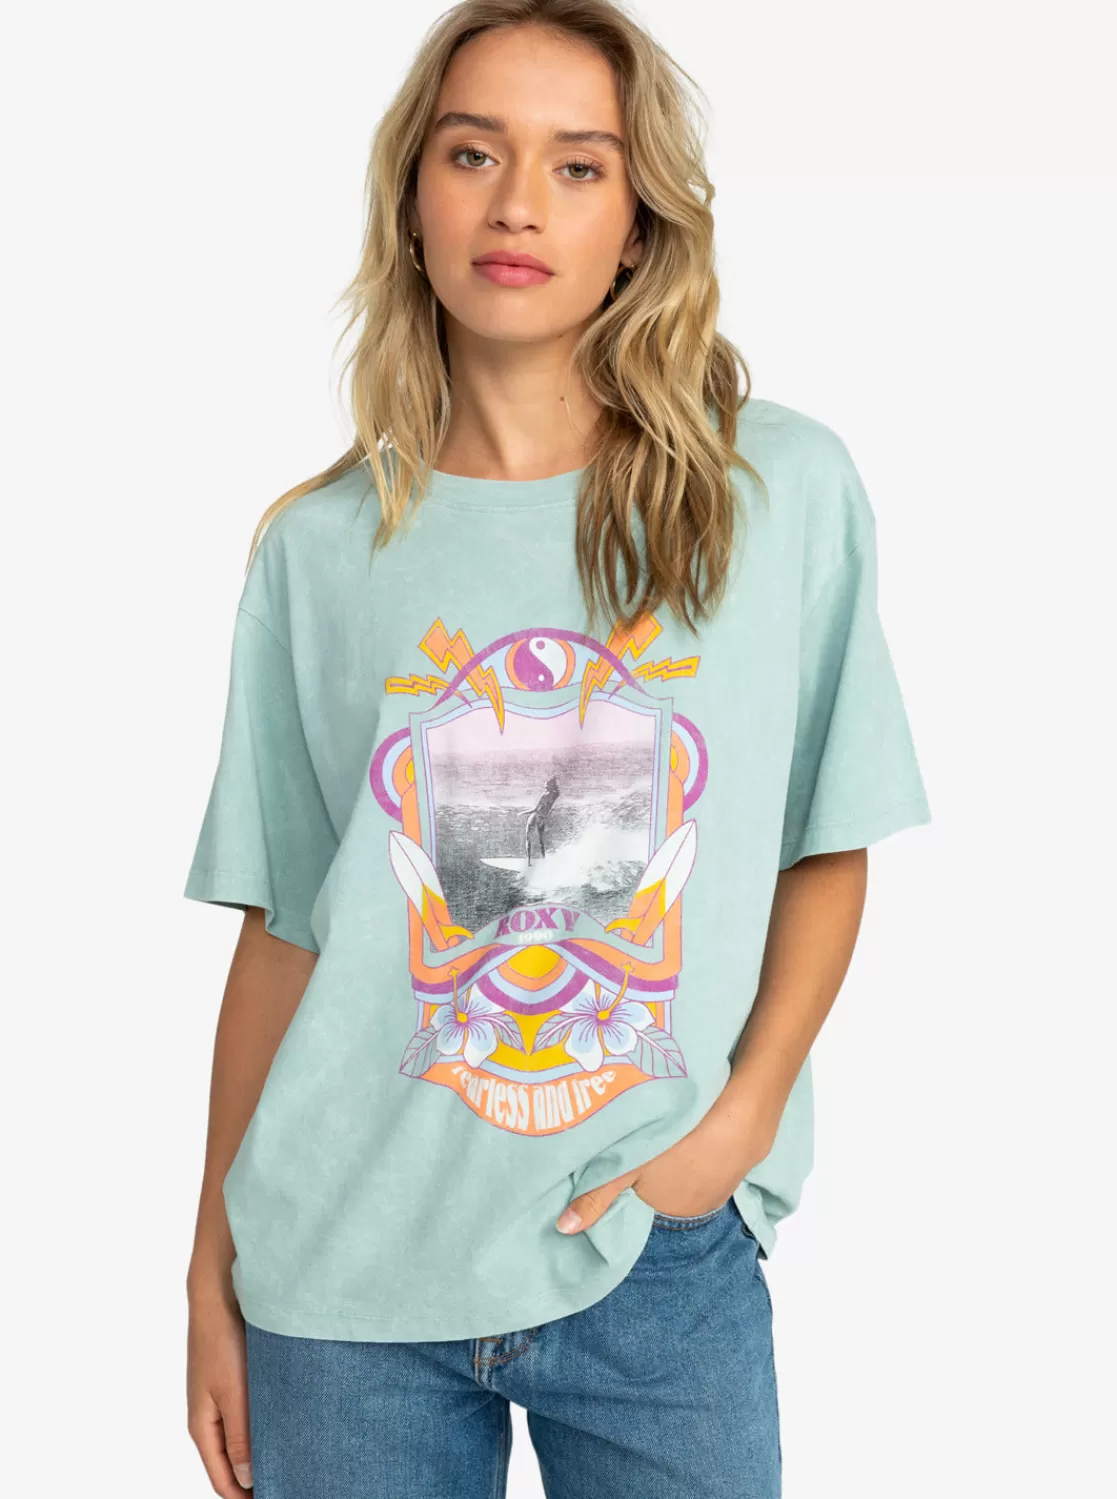 Girl Need Love A Oversized T-Shirt-ROXY Outlet